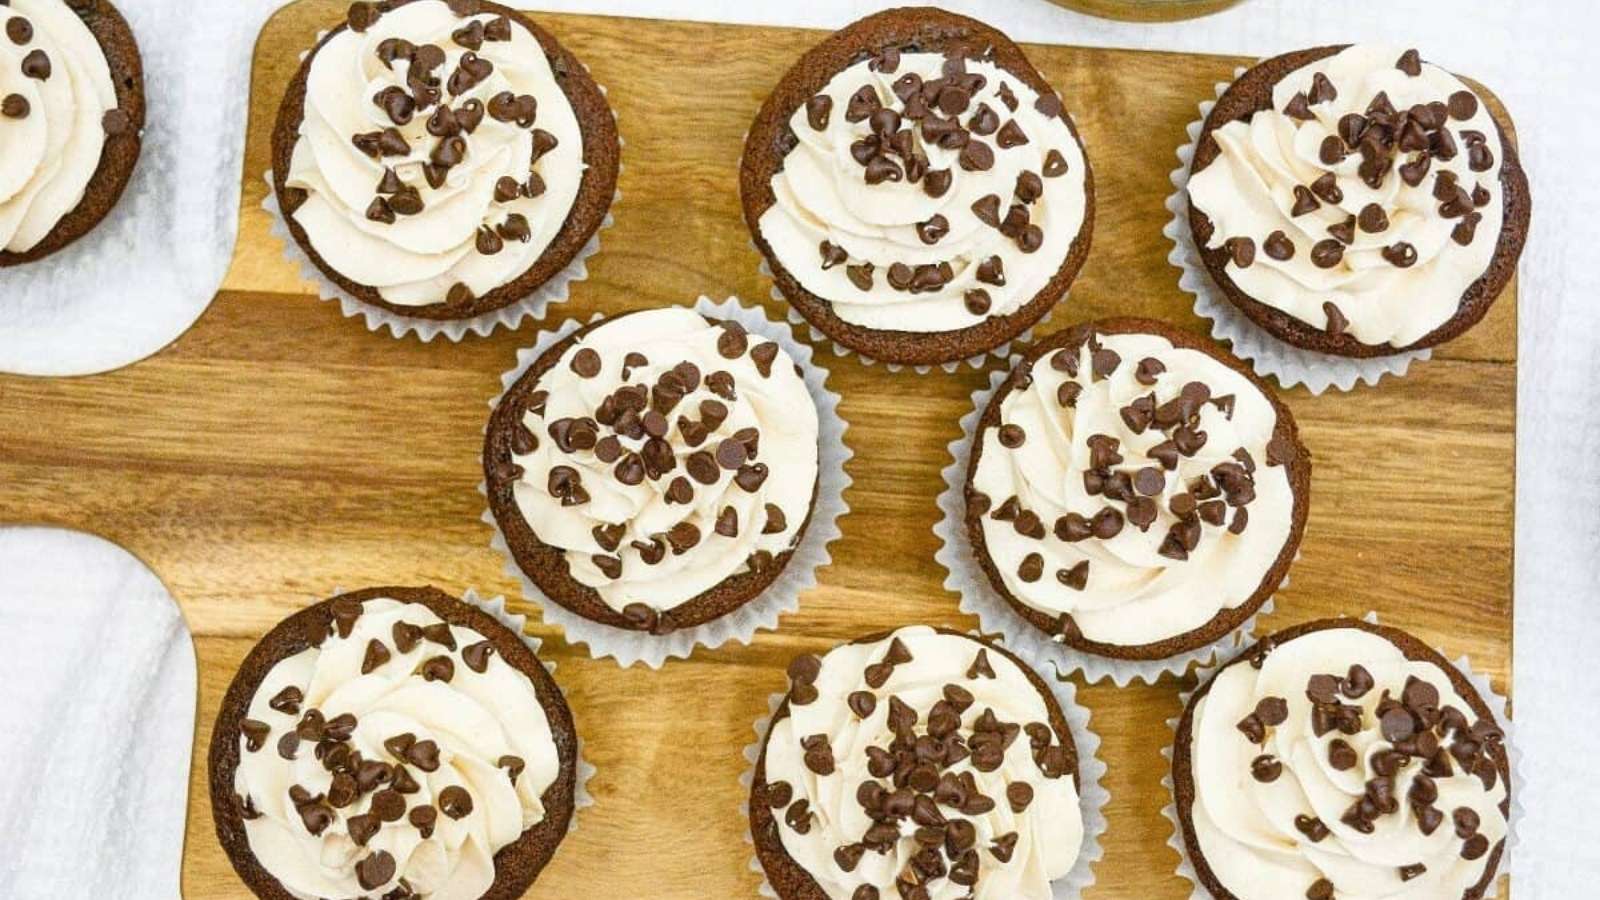 Chocolate chip cupcakes on a wooden cutting board.